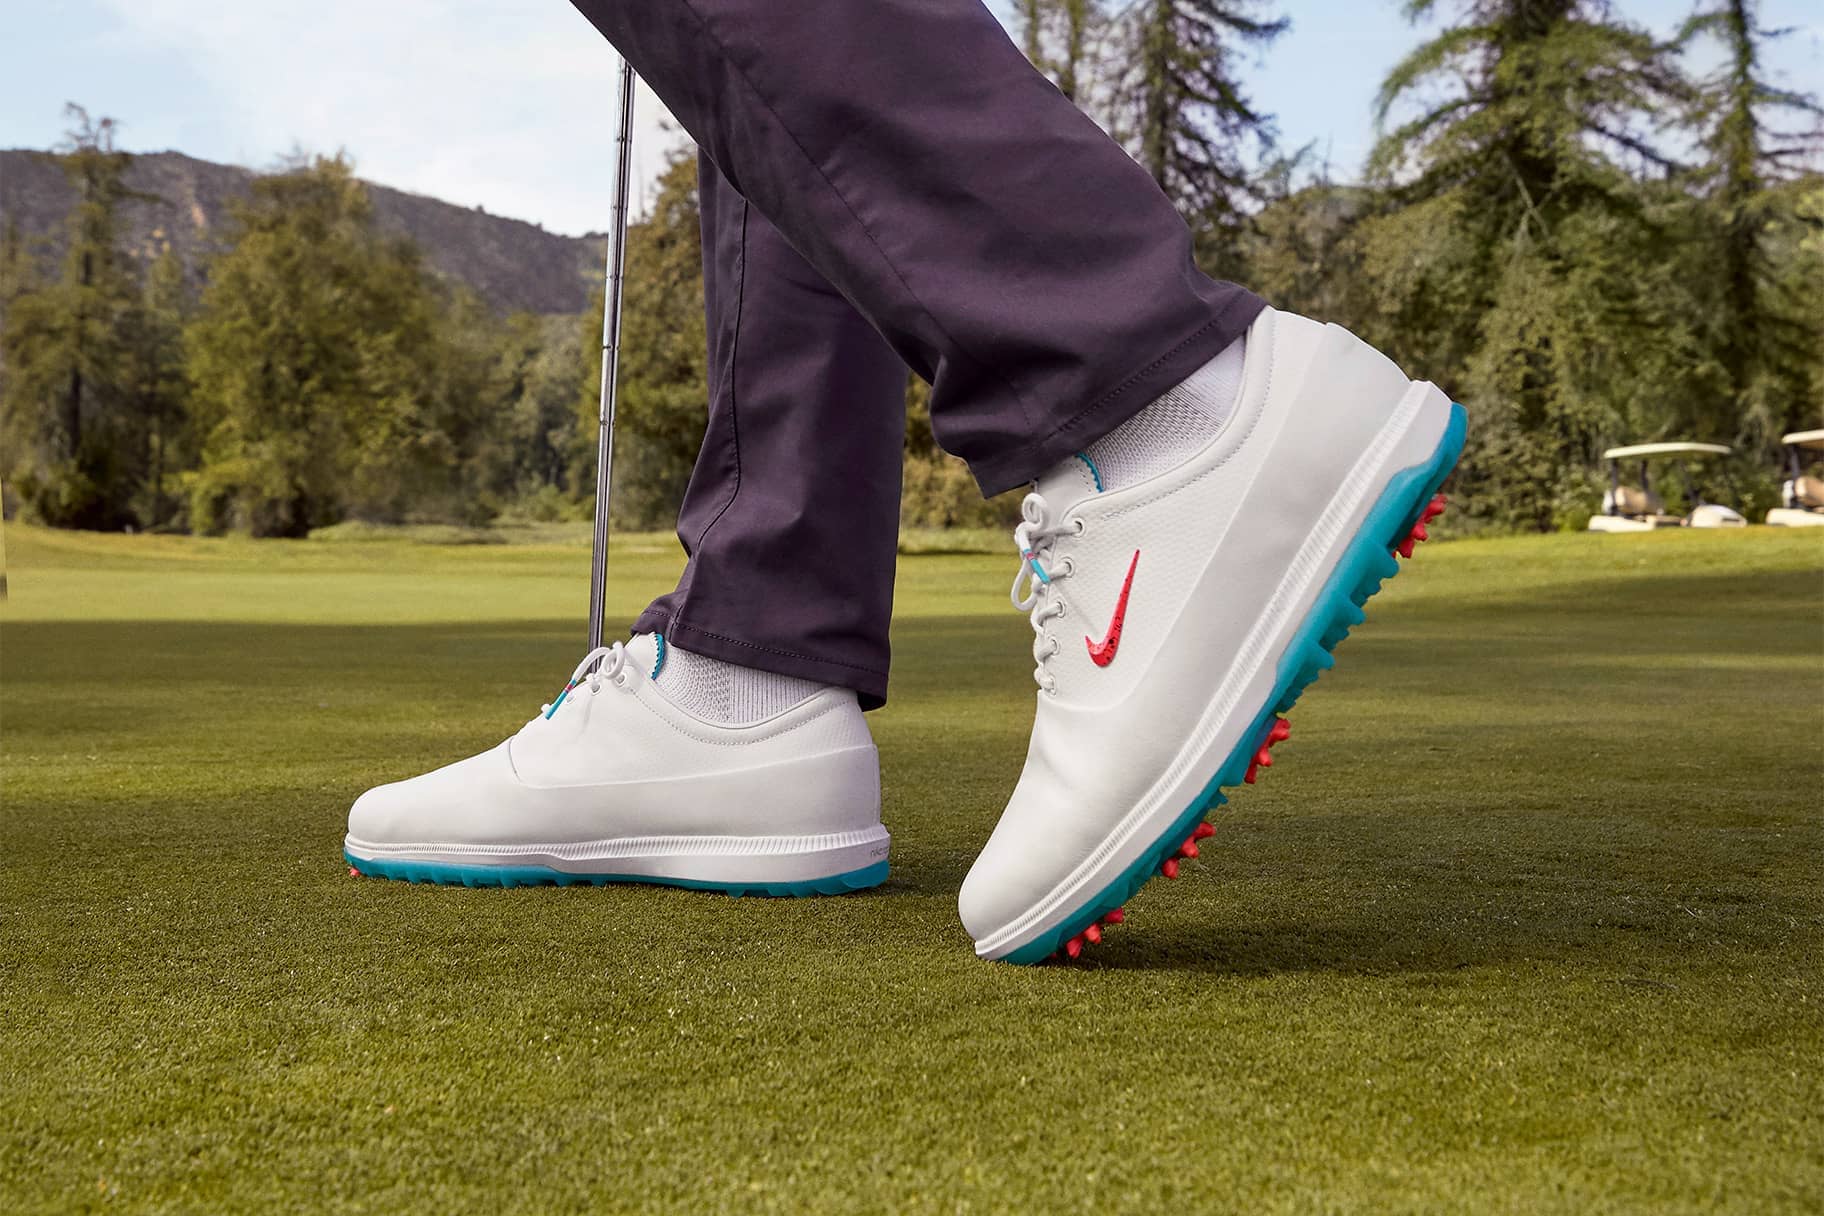 Nike's Best Golf Shoes for Traction, Stability and Comfort. Nike.com